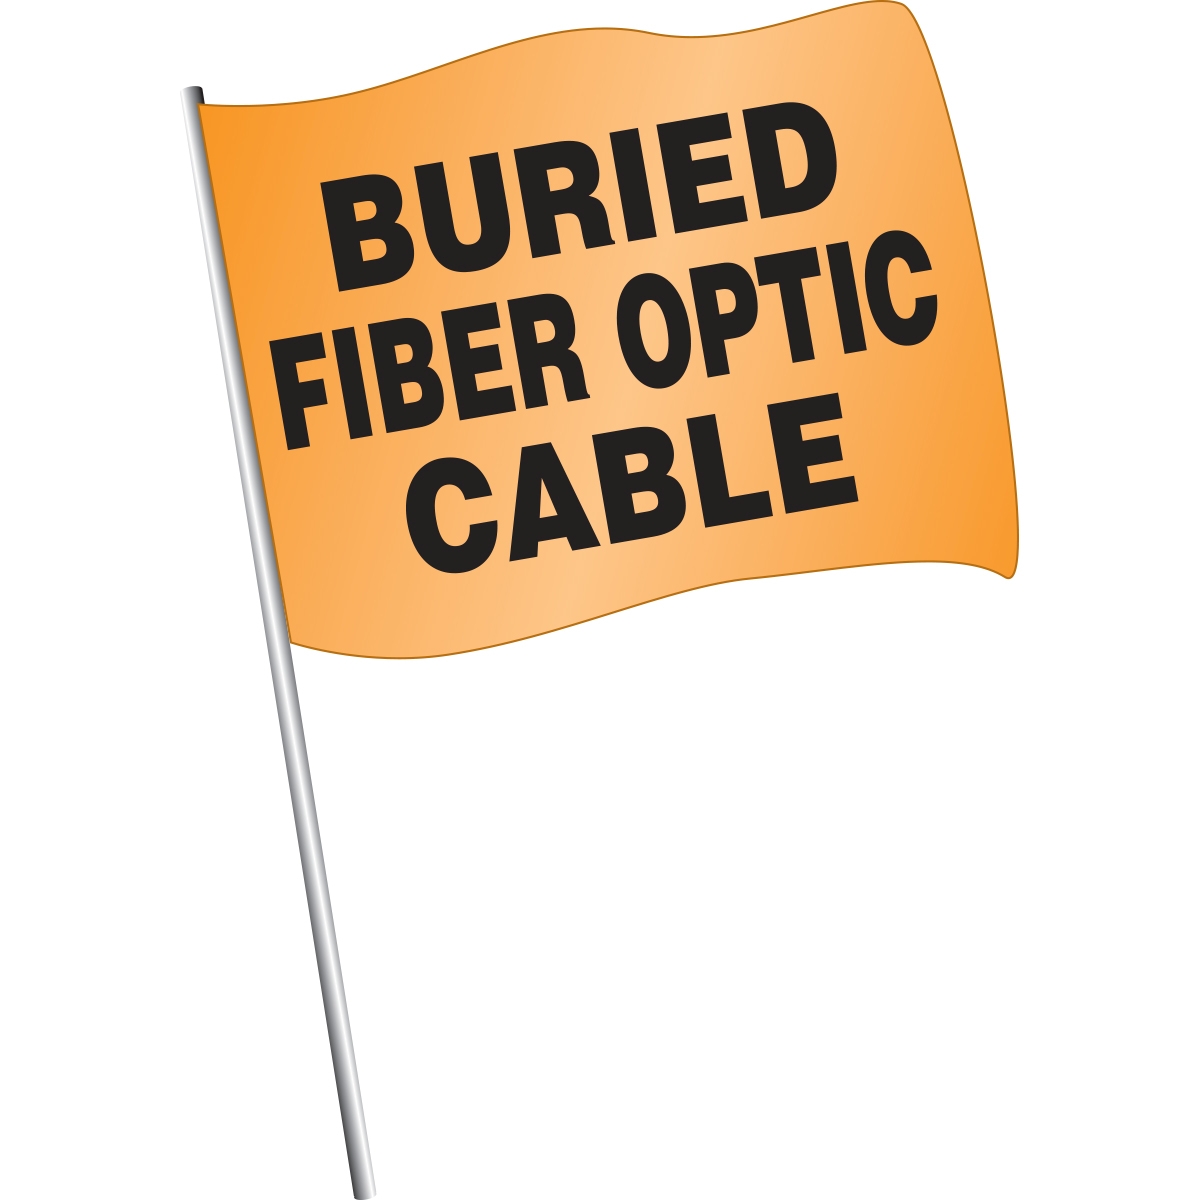 BURIED FIBER OPTIC CABLE